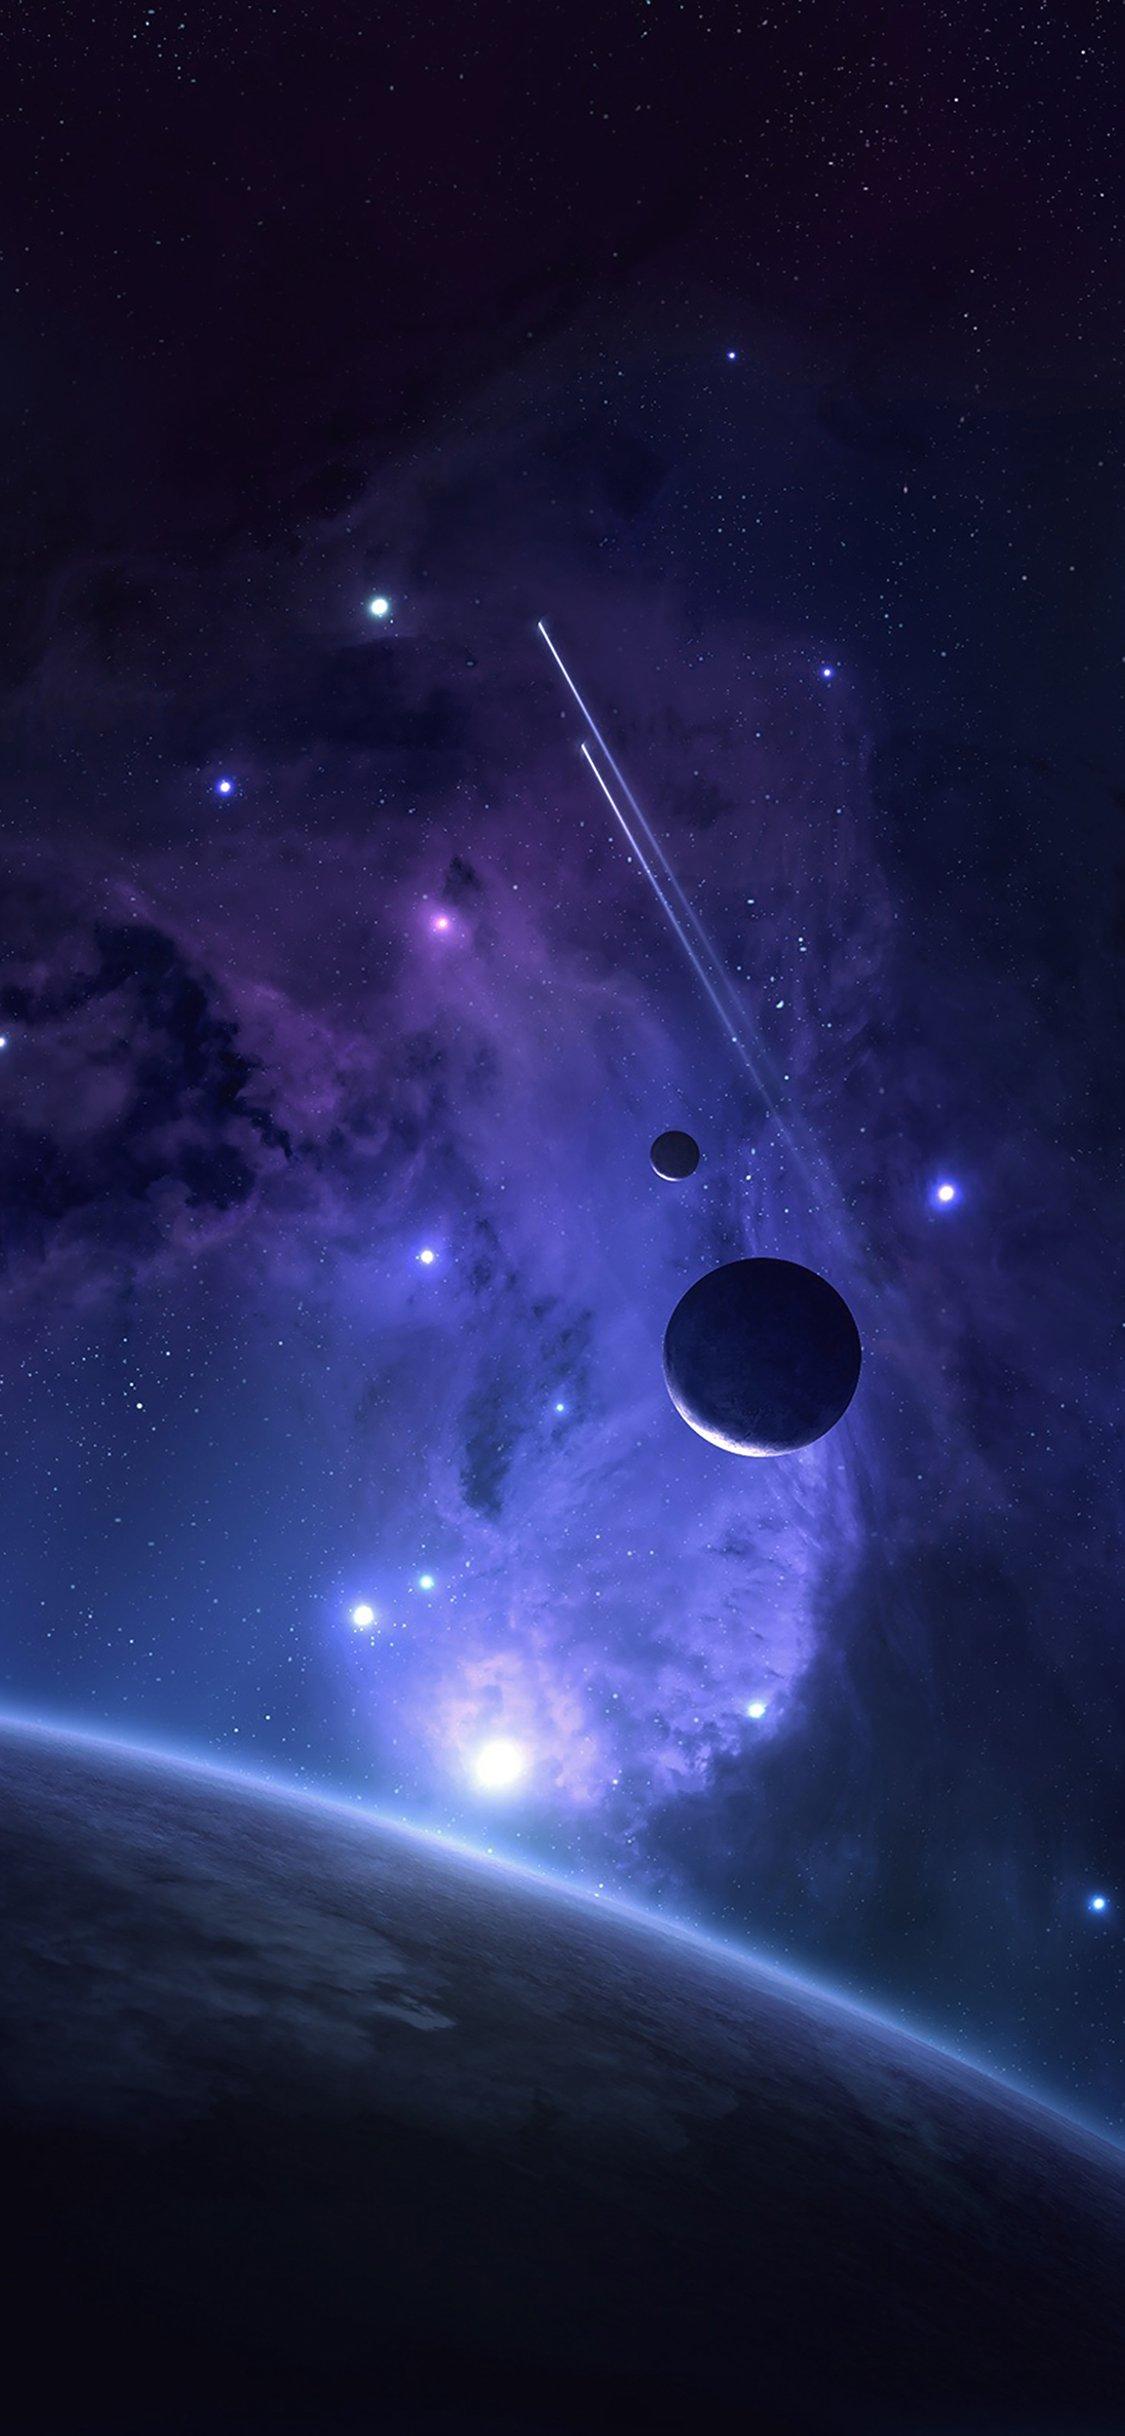 Space Wallpaper For Iphone Iphone Wallpapers Space Wallpaper Blue Wallpapers Tweet